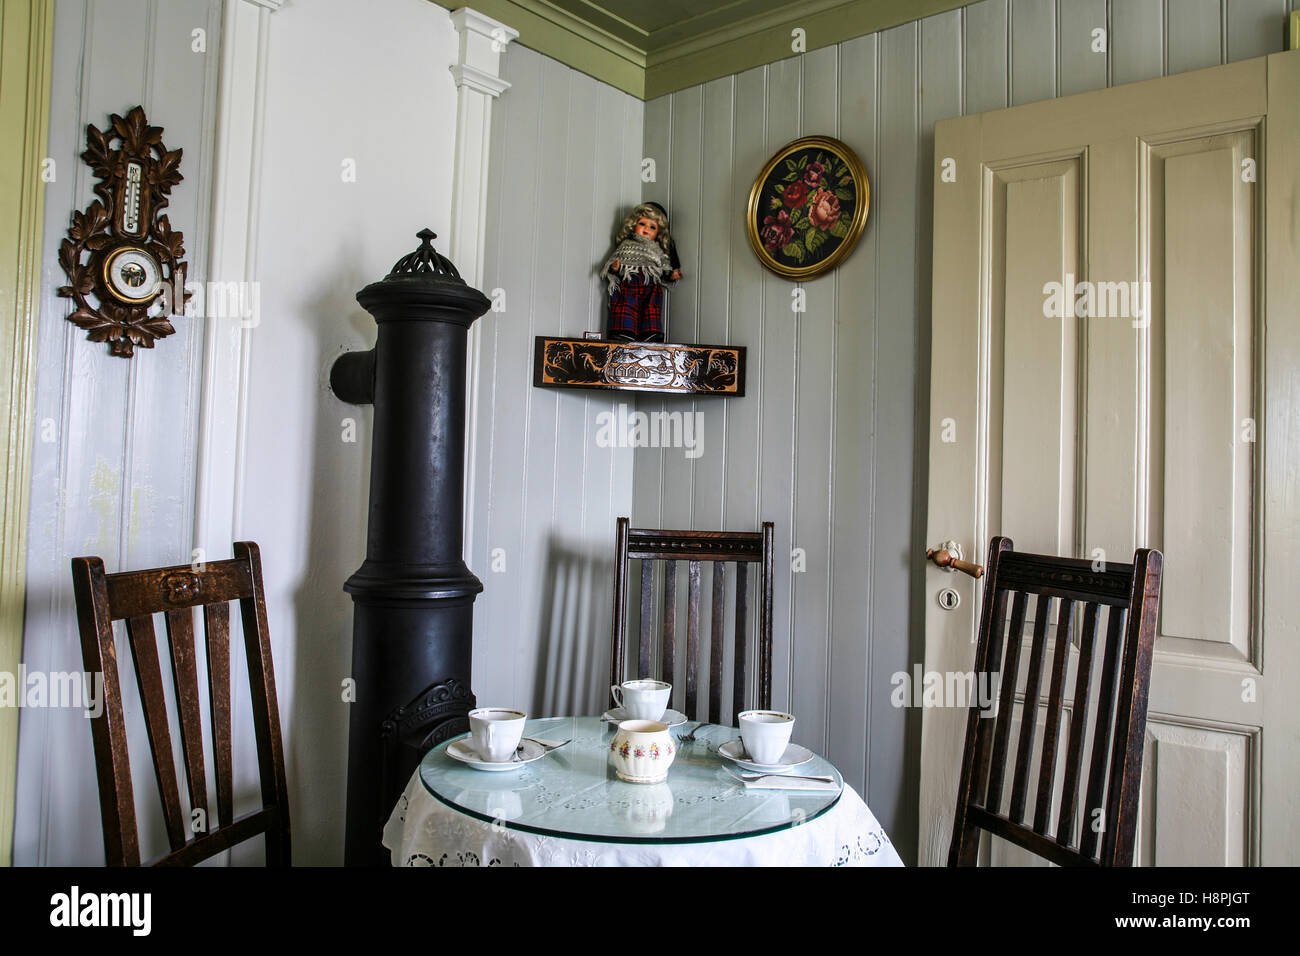 Vintage Style Icelandic Farm Kitchen Dining Room At The